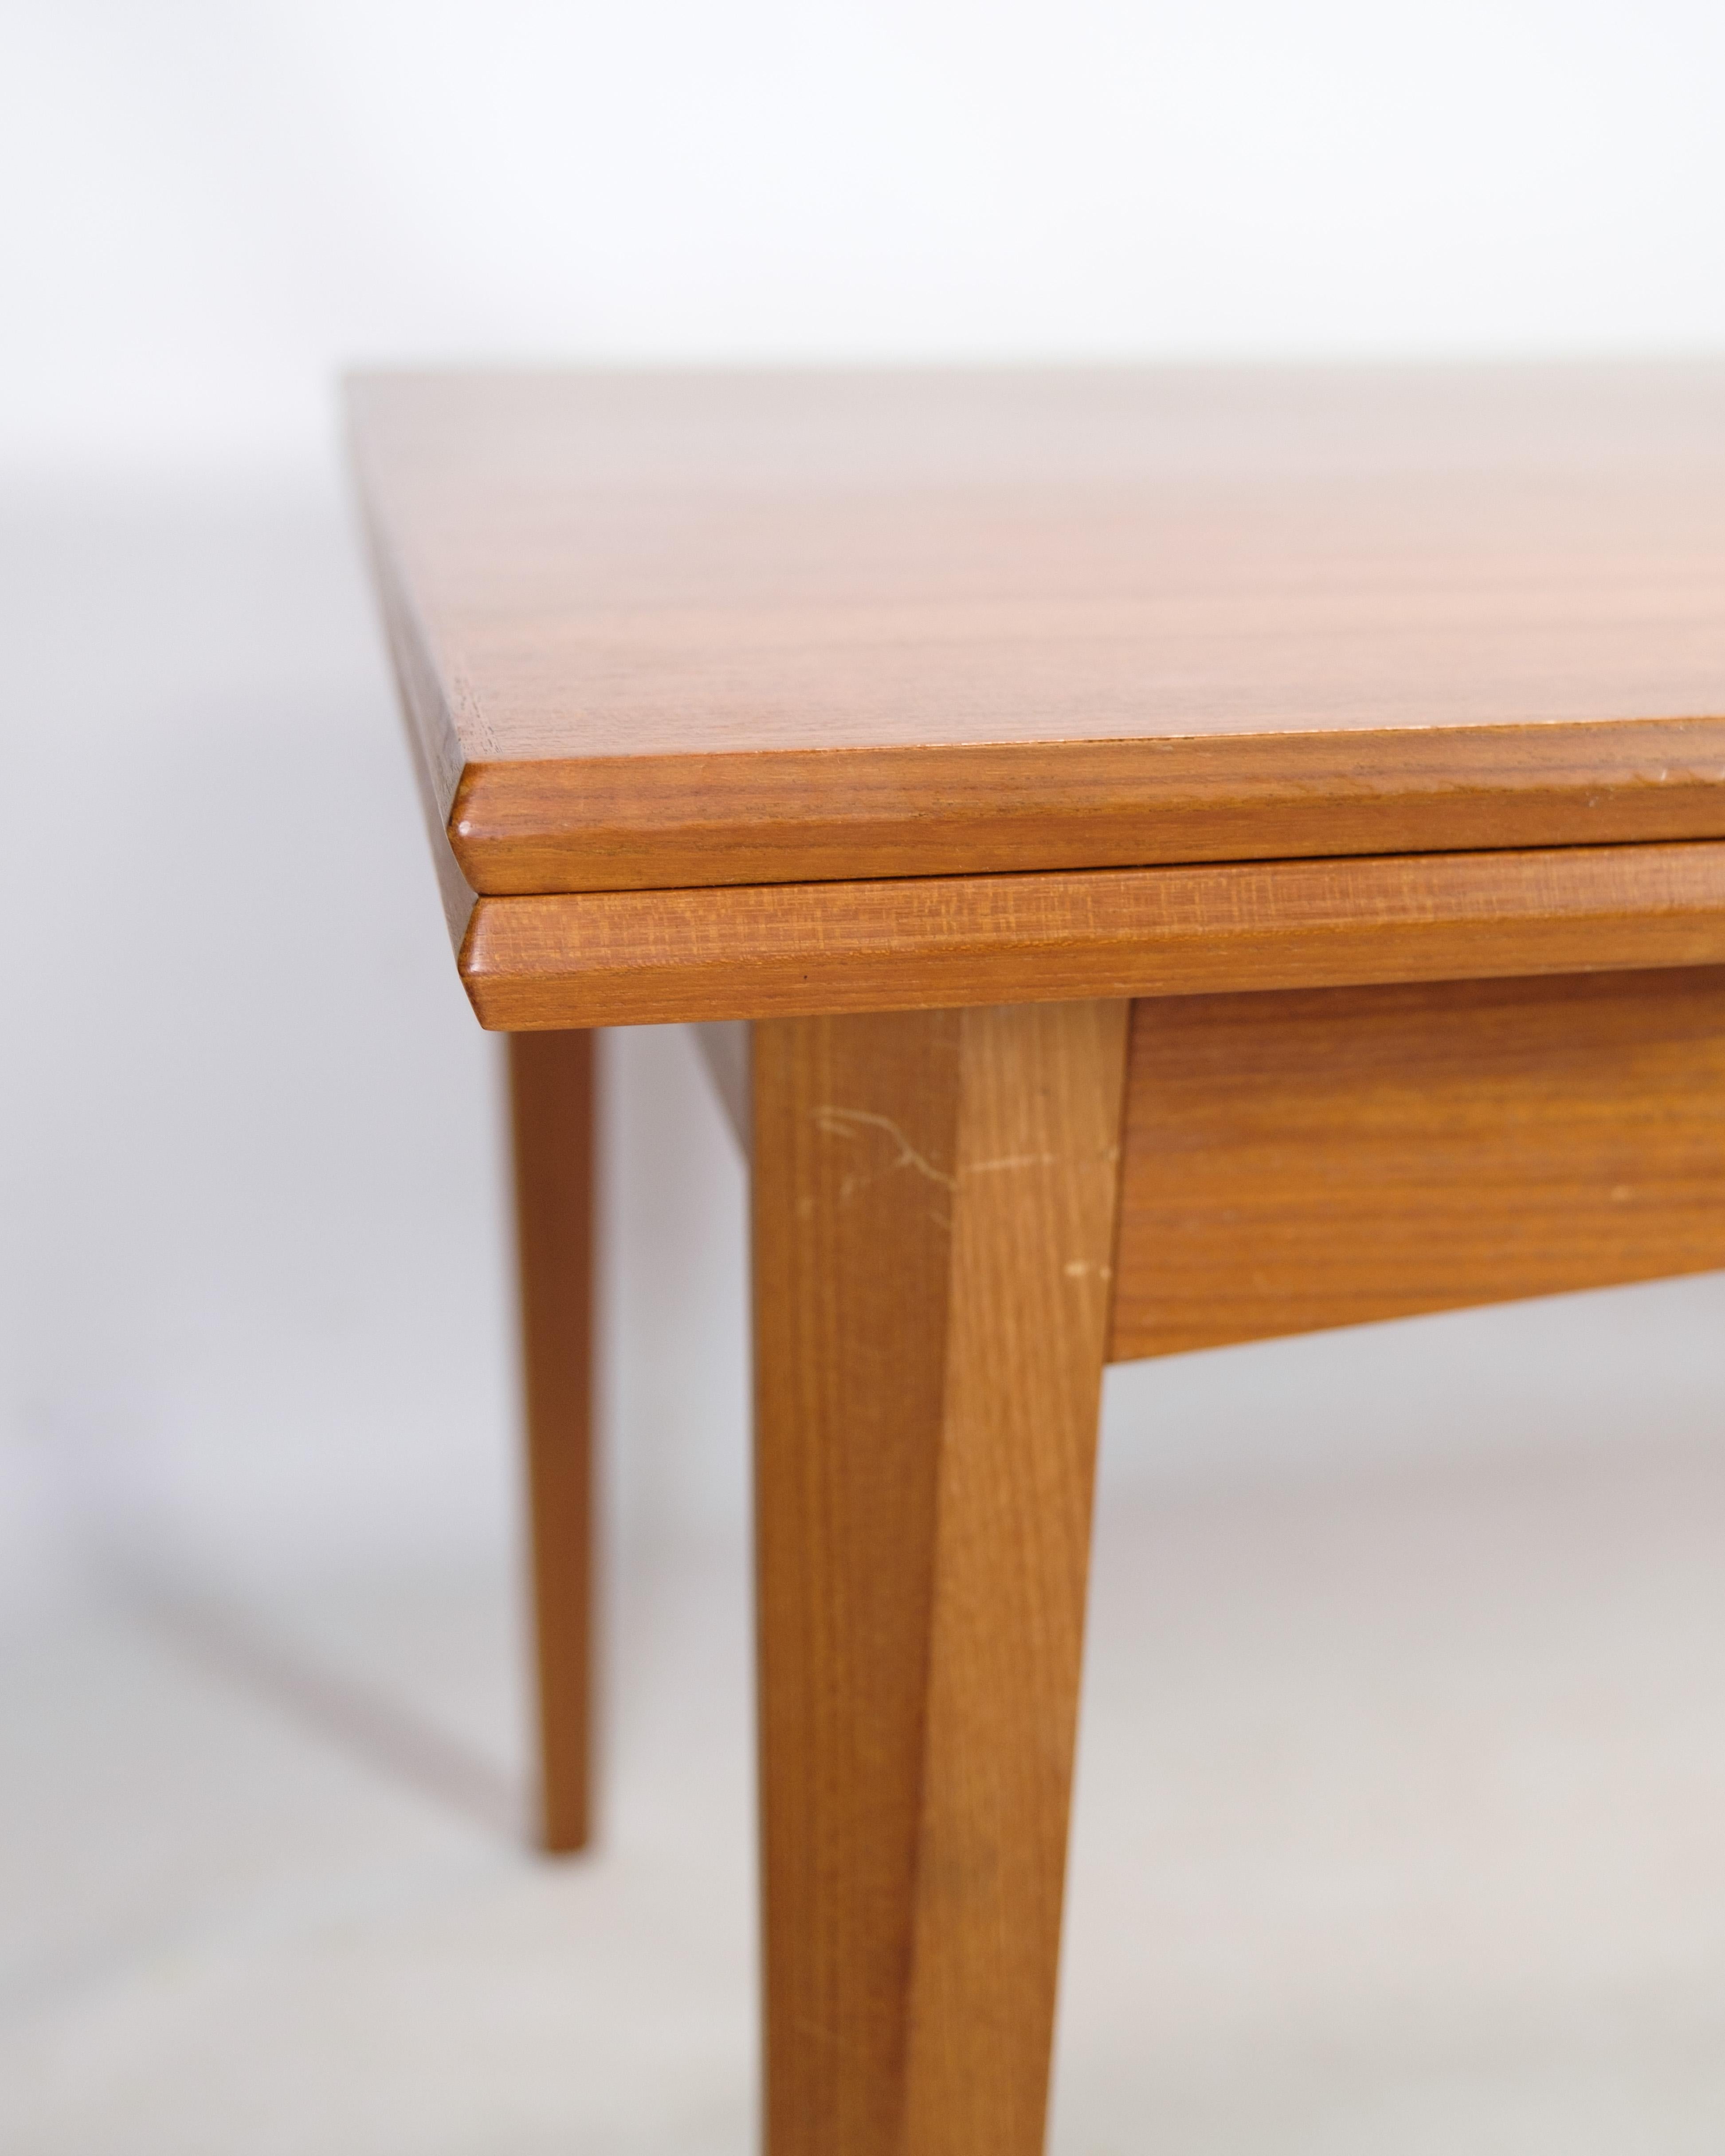 Dining Table, Teak, Dutch Extension, Danish Design, 1960 In Good Condition For Sale In Lejre, DK